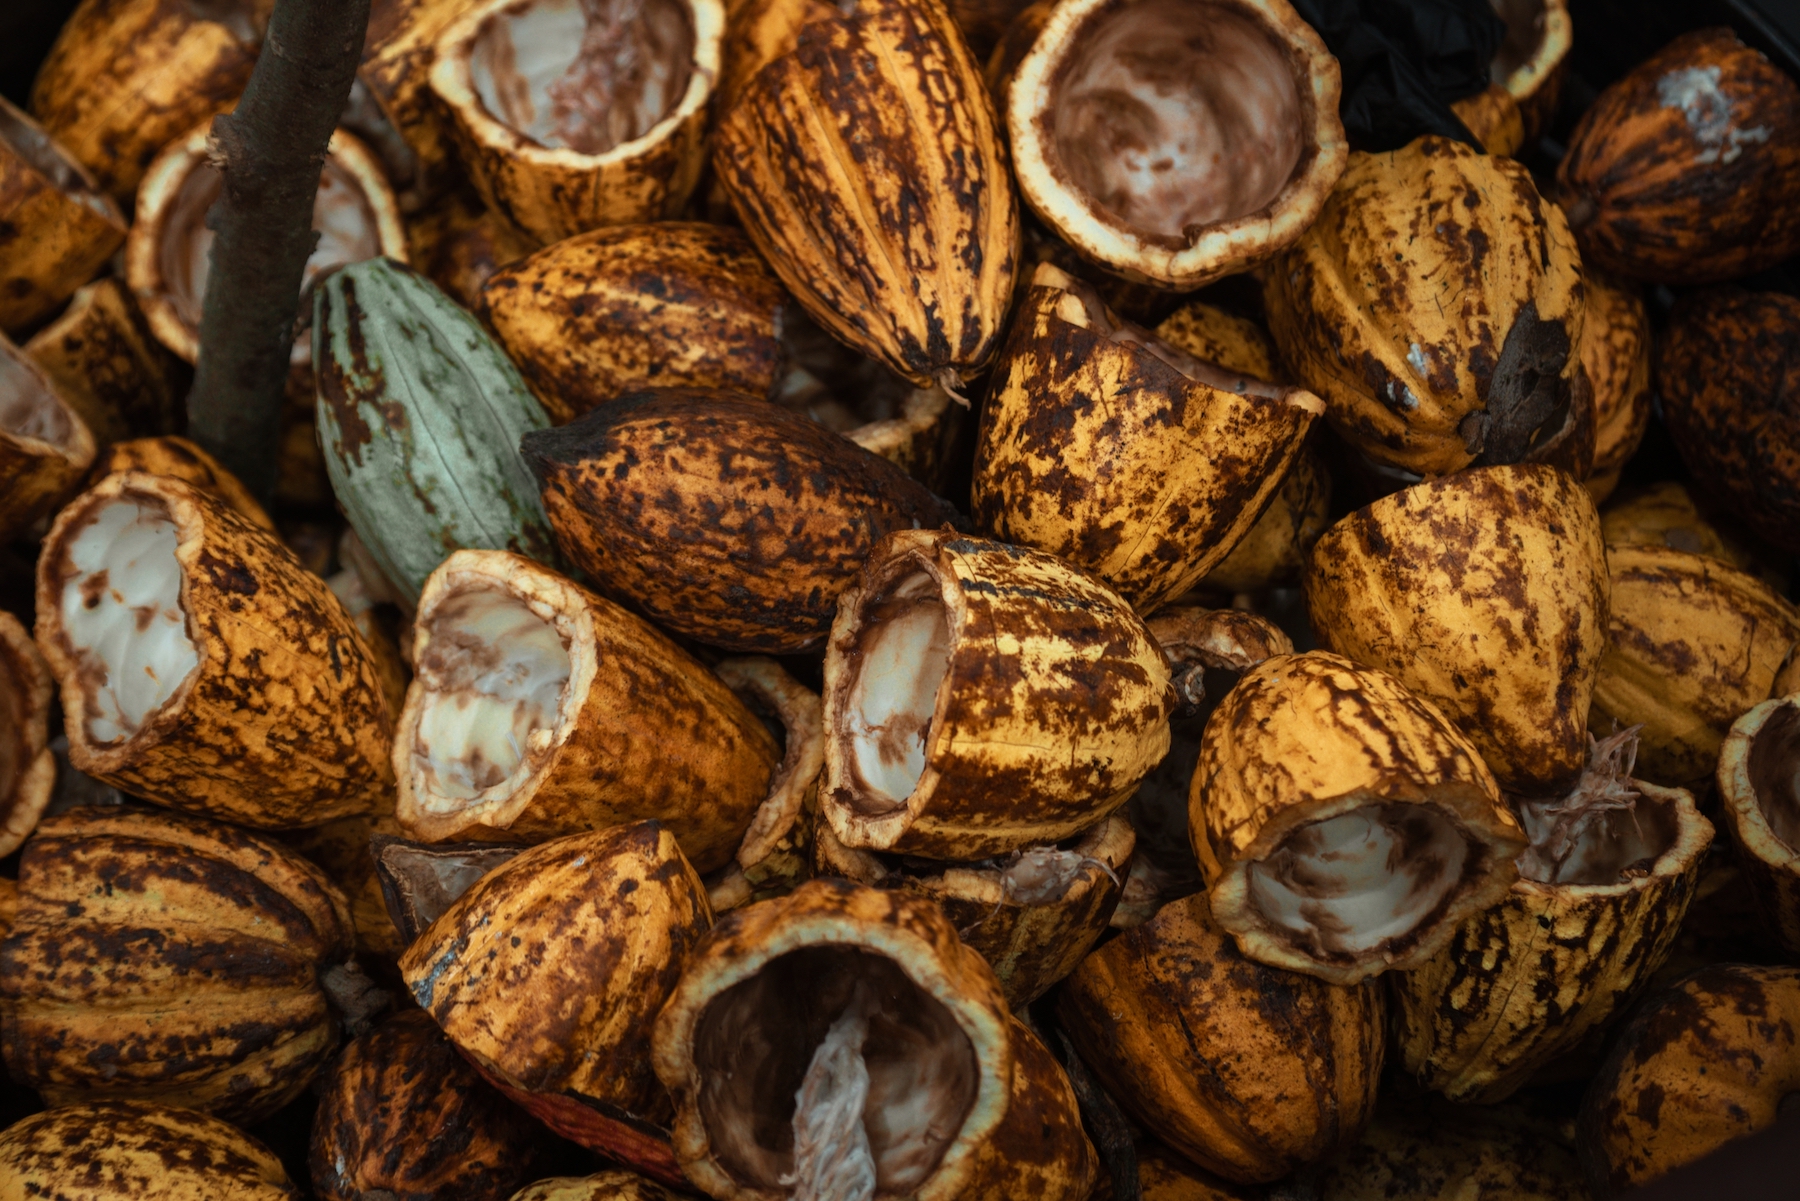 Cocoa husks with seeds removed.